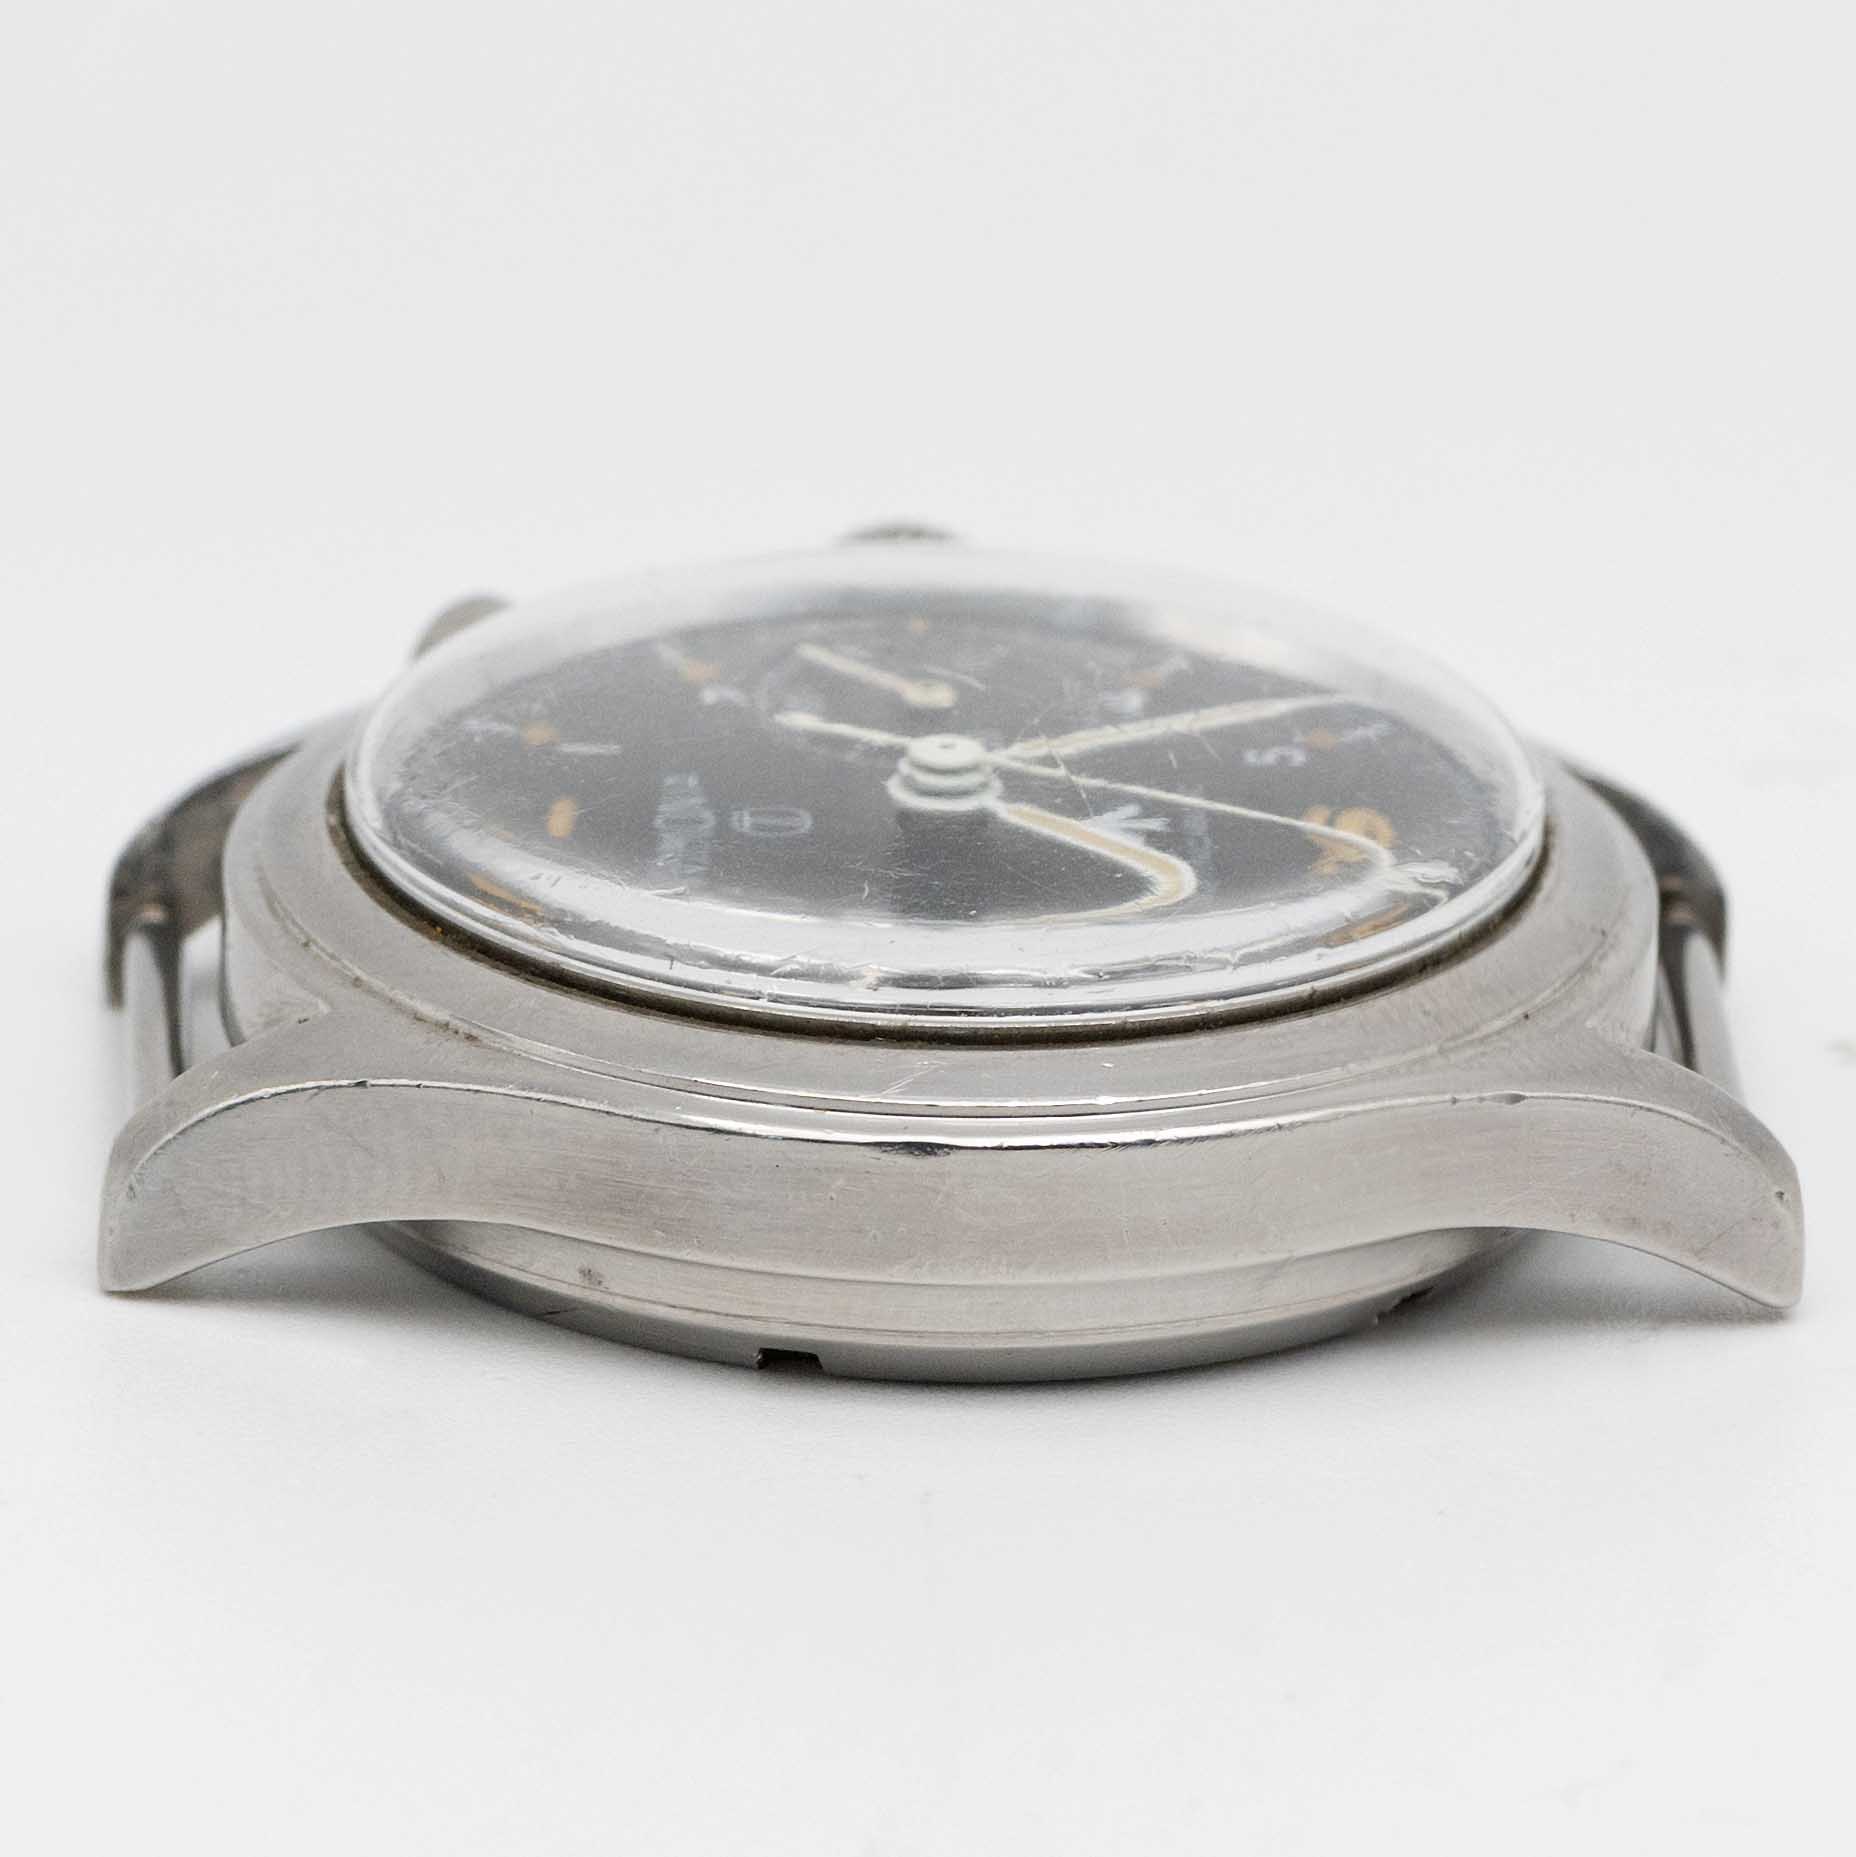 A GENTLEMAN'S STAINLESS STEEL BRITISH MILITARY ROYAL NAVY LEMANIA SINGLE BUTTON CHRONOGRAPH WRIST - Image 8 of 8